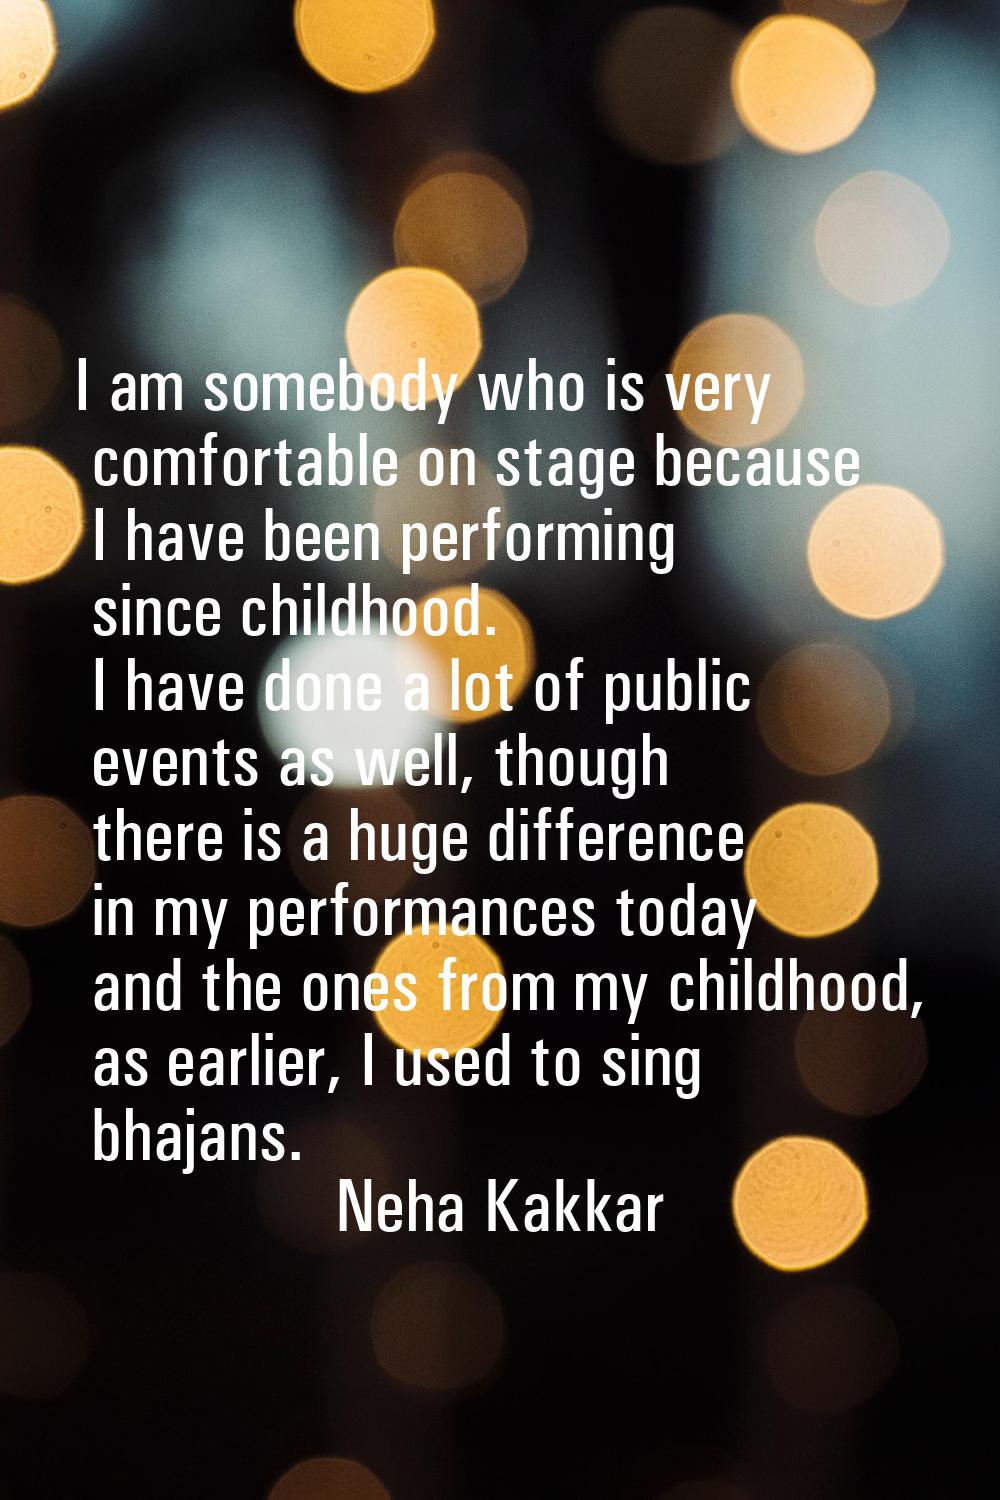 I am somebody who is very comfortable on stage because I have been performing since childhood. I ha